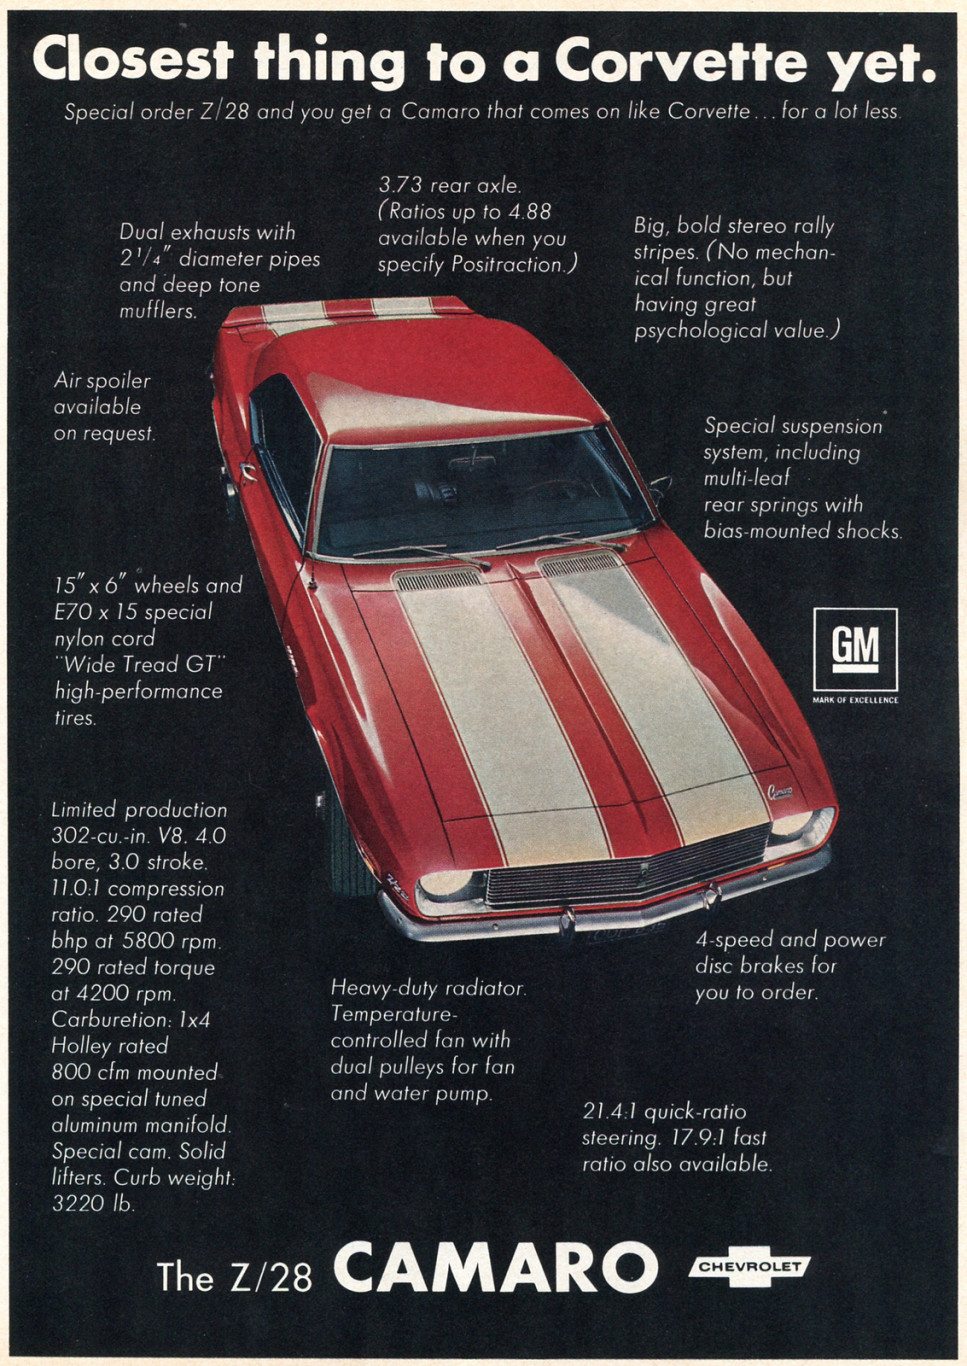 1969 Z28 Camaro Ad - Closest Thing to a Corvette Yet.